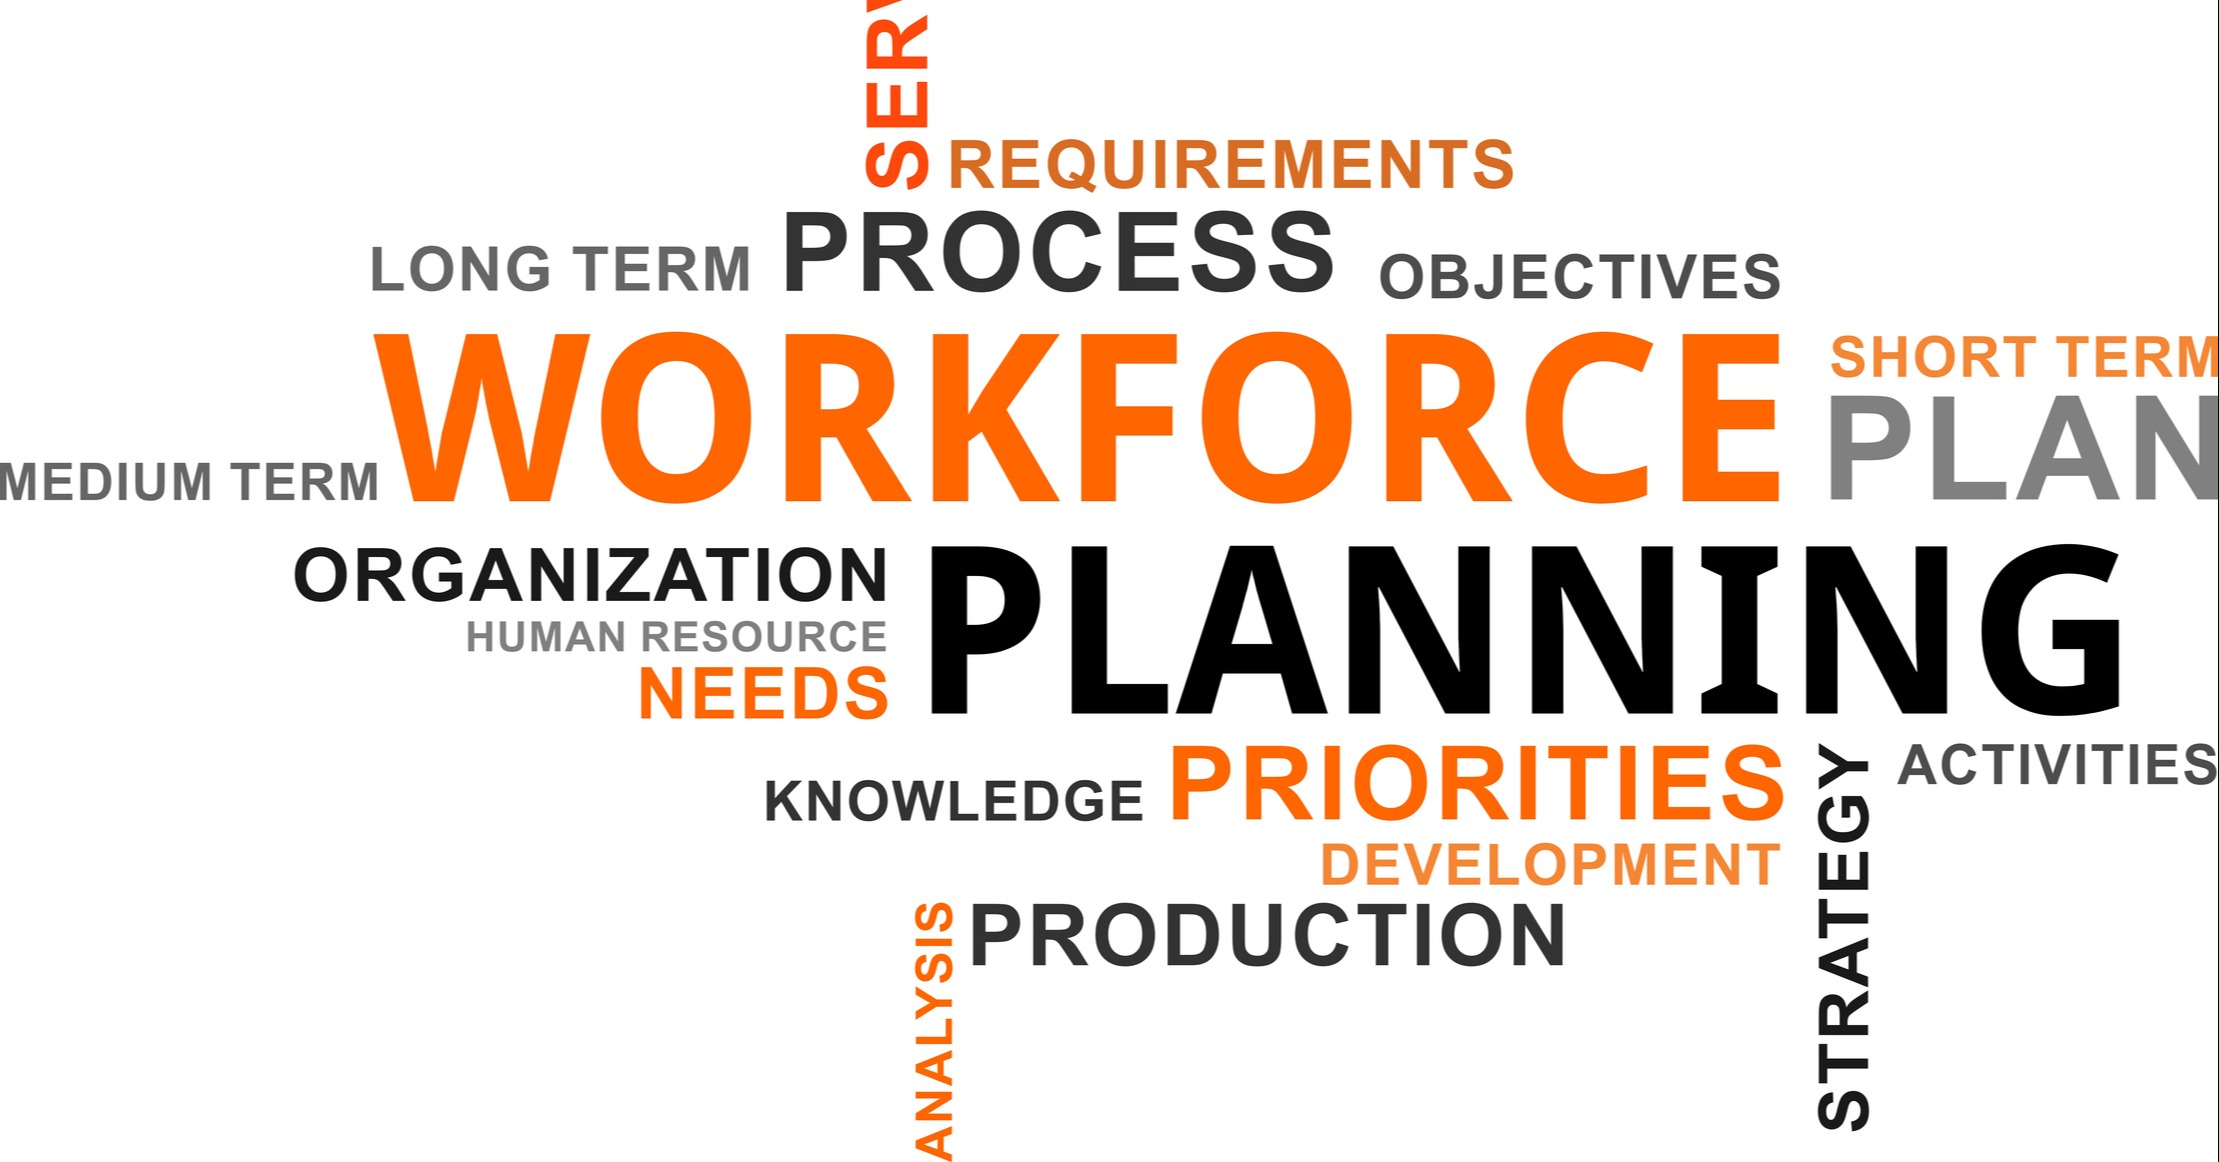 What is Workforce Management?